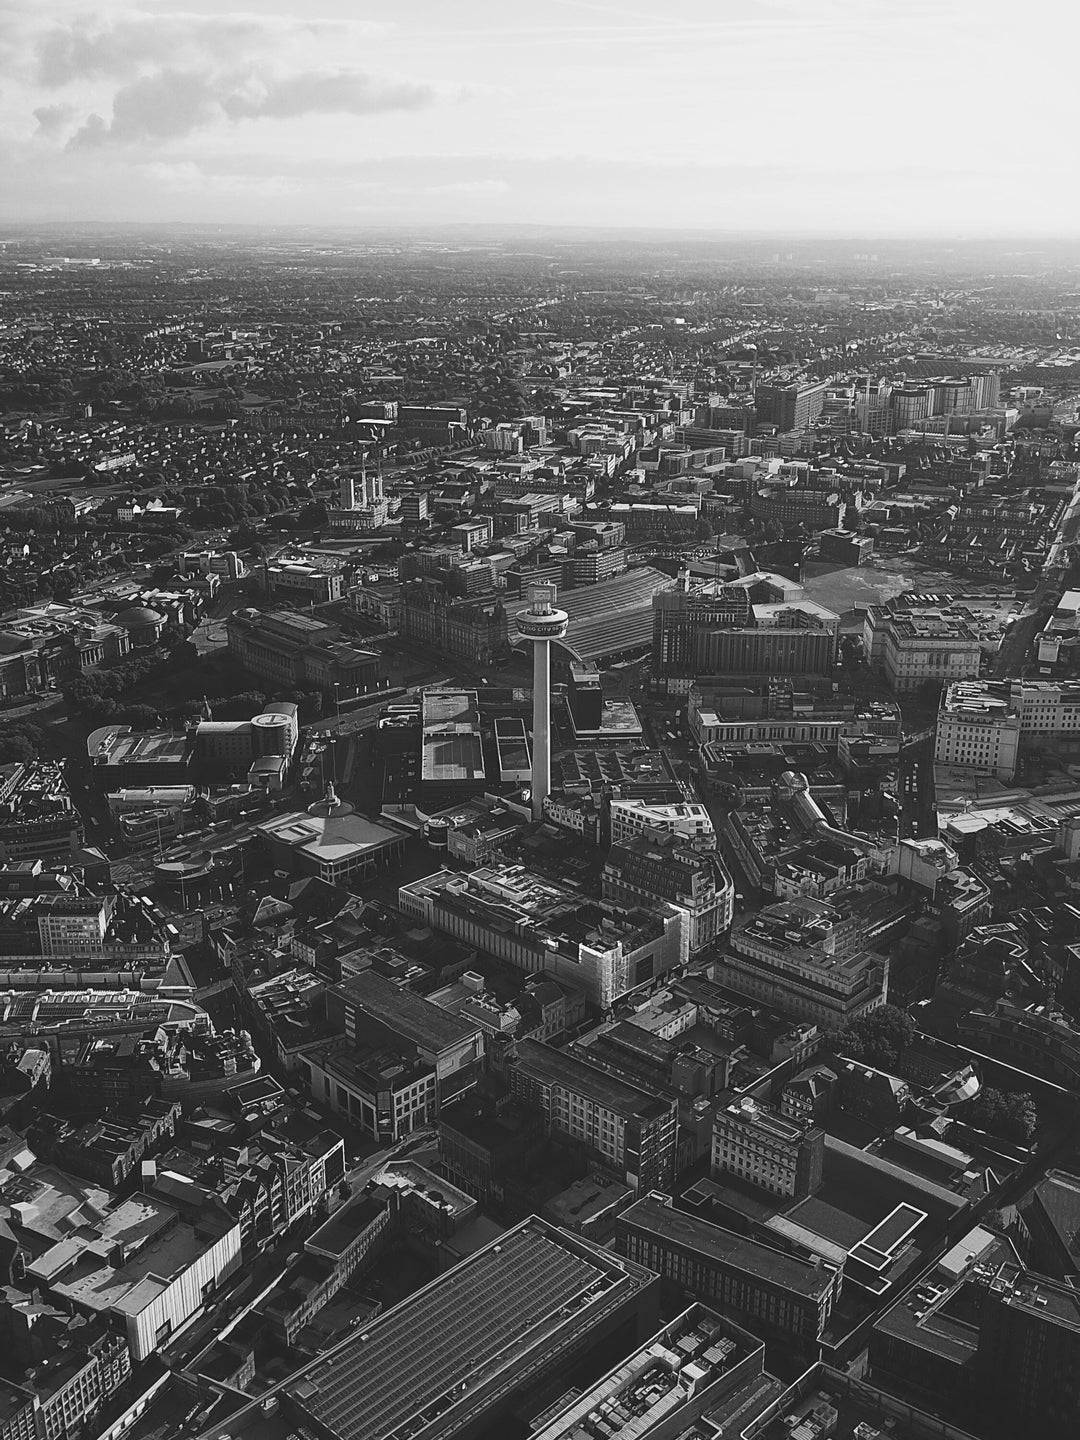 Liverpool from above in black and white Photo Print - Canvas - Framed Photo Print - Hampshire Prints